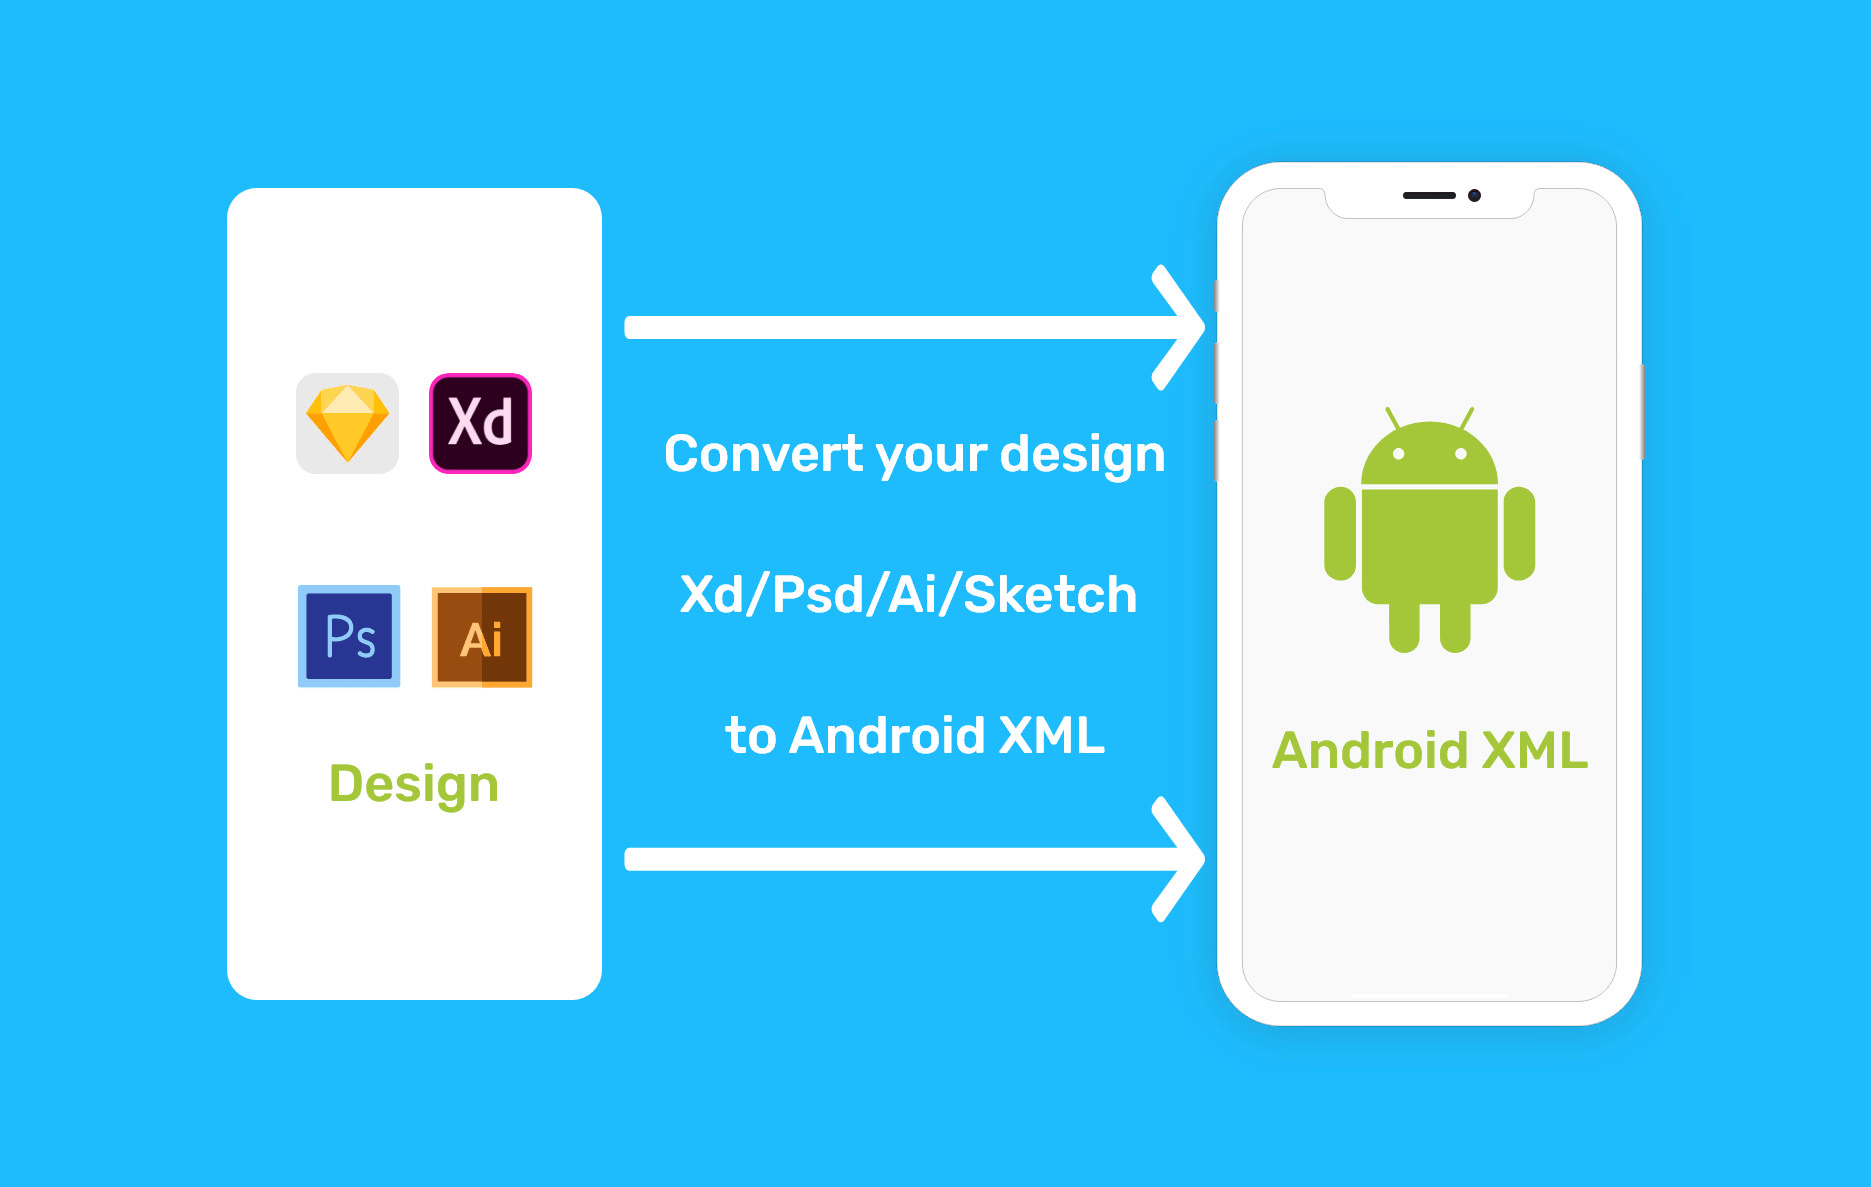 Free Android XML Designs from Uplabs.com - part 2 | Android app design,  Free android, App design layout